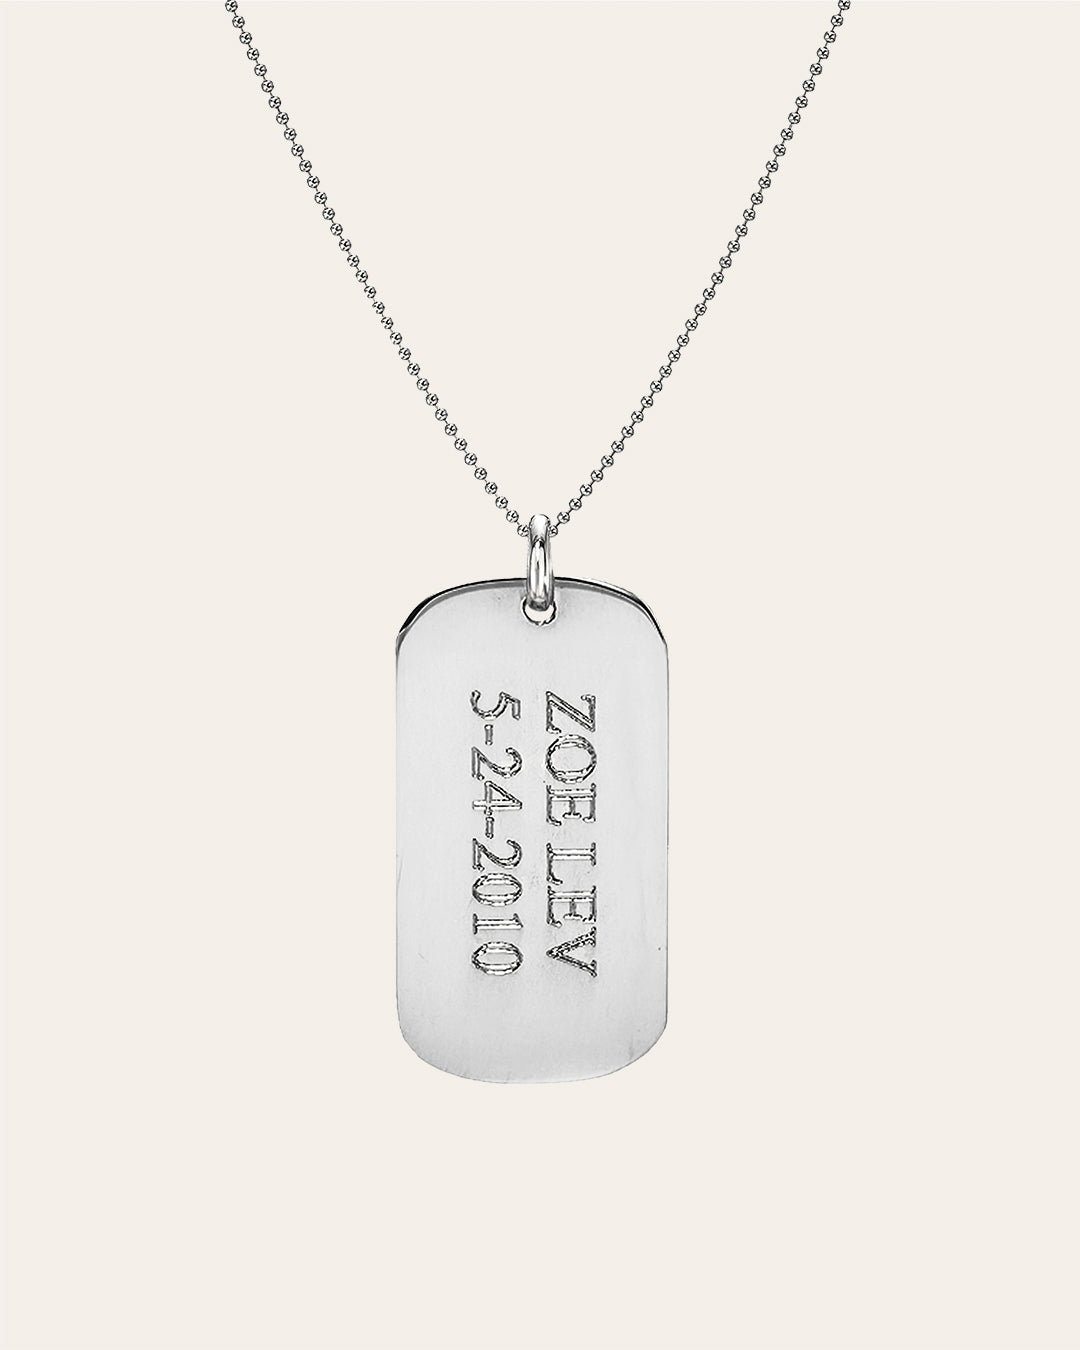 Men's Sterling Silver Dog Tag Necklace with LGBT Gay Pride Symbol